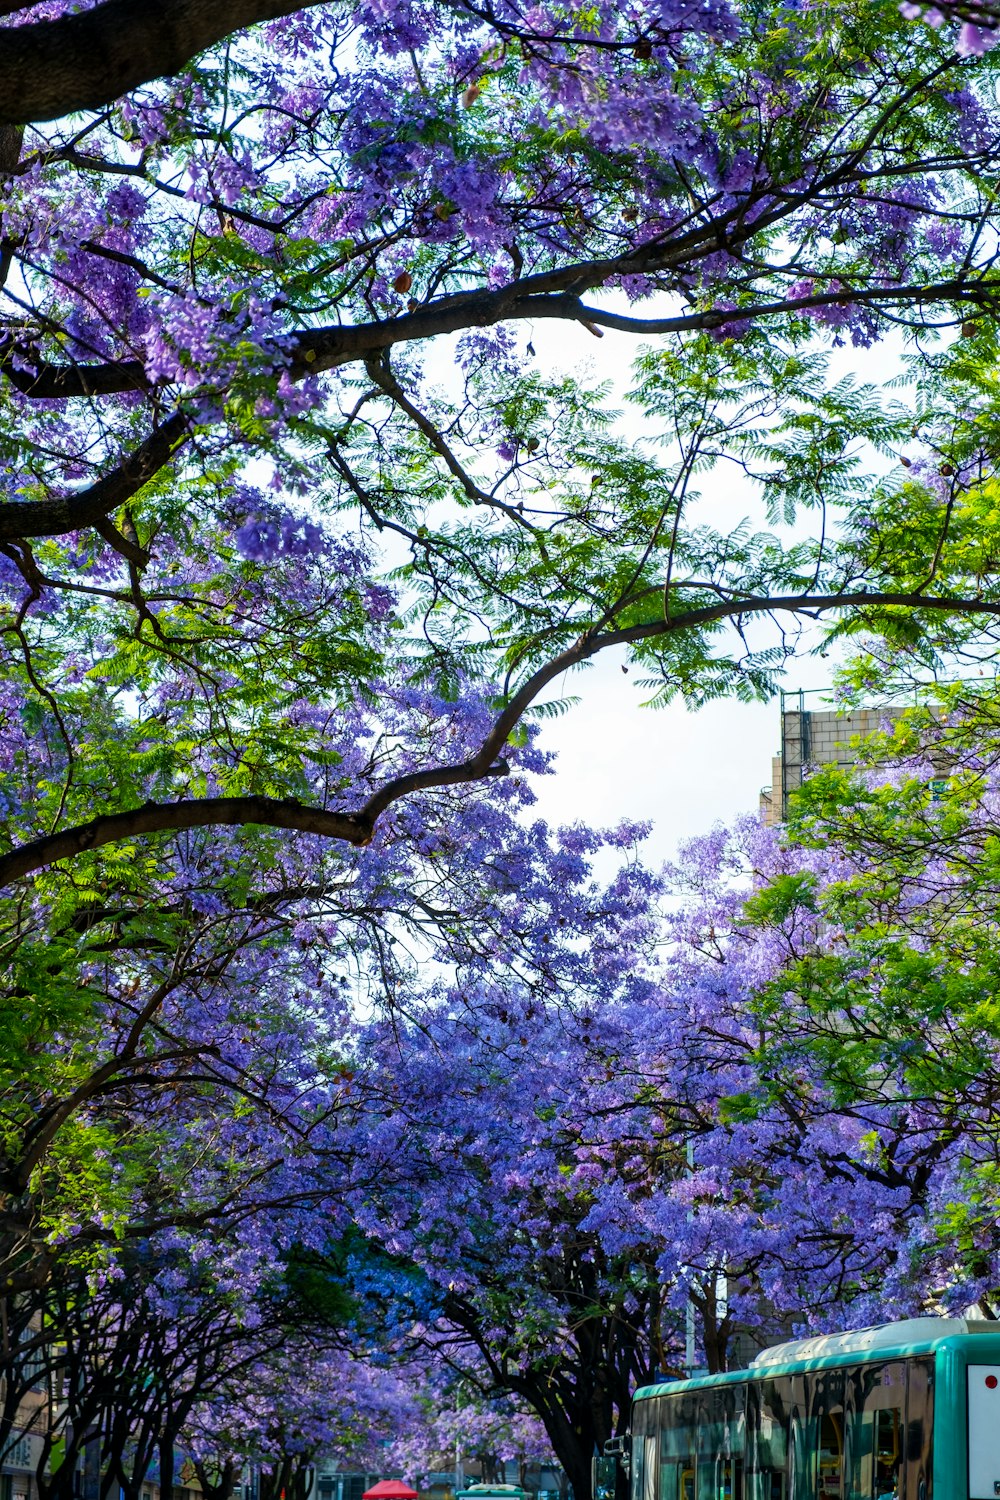 a bus driving down a street next to trees with purple flowers